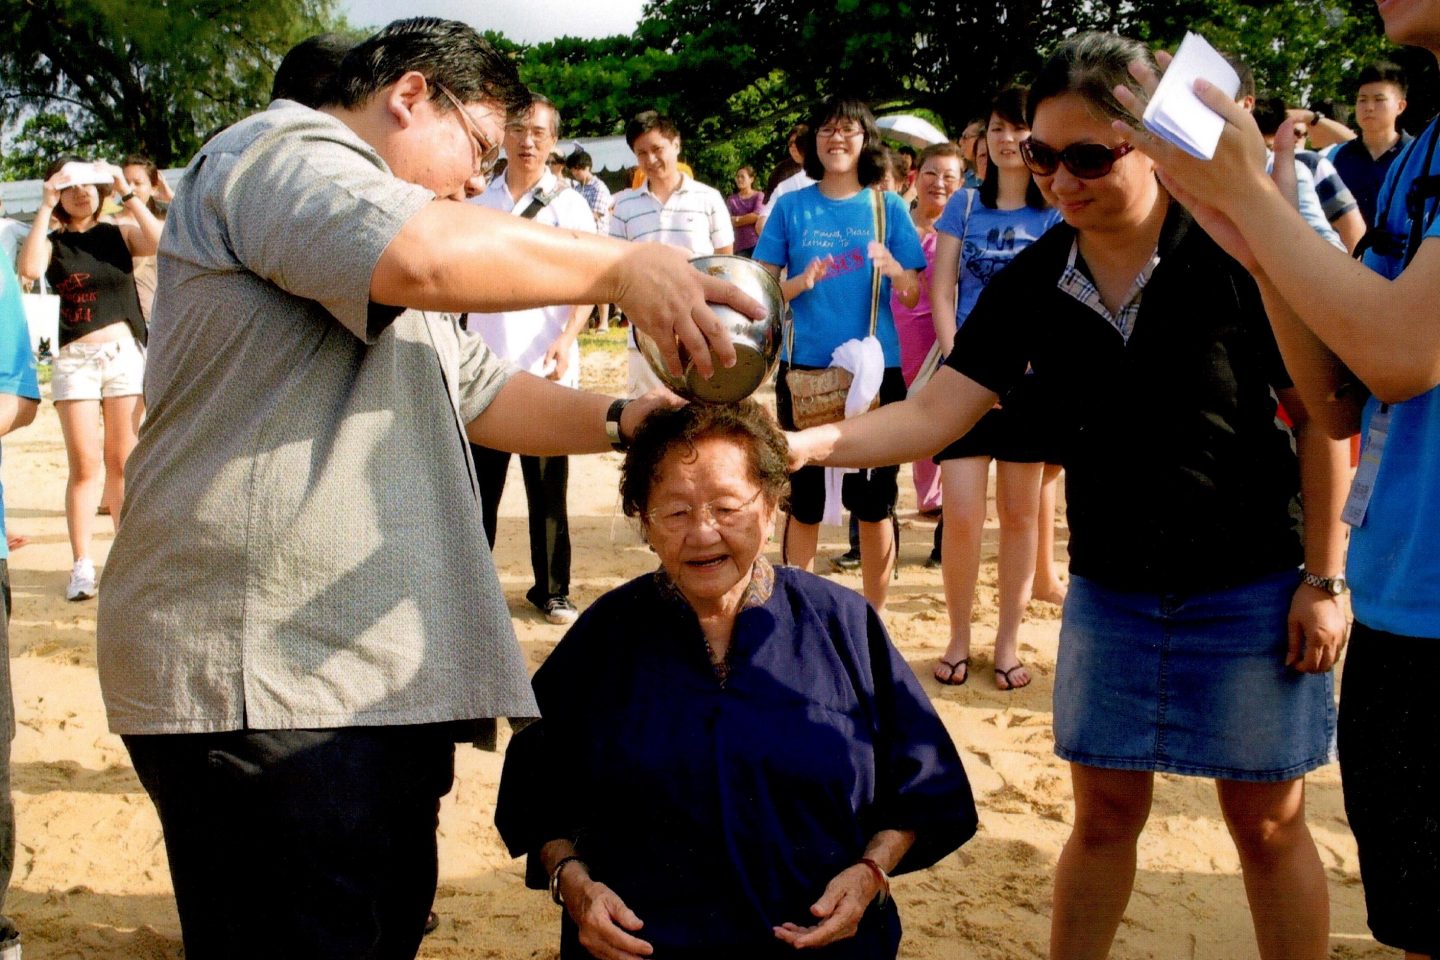 Arielle's grandmother was baptised at an Easter service at the beach in 2012. 